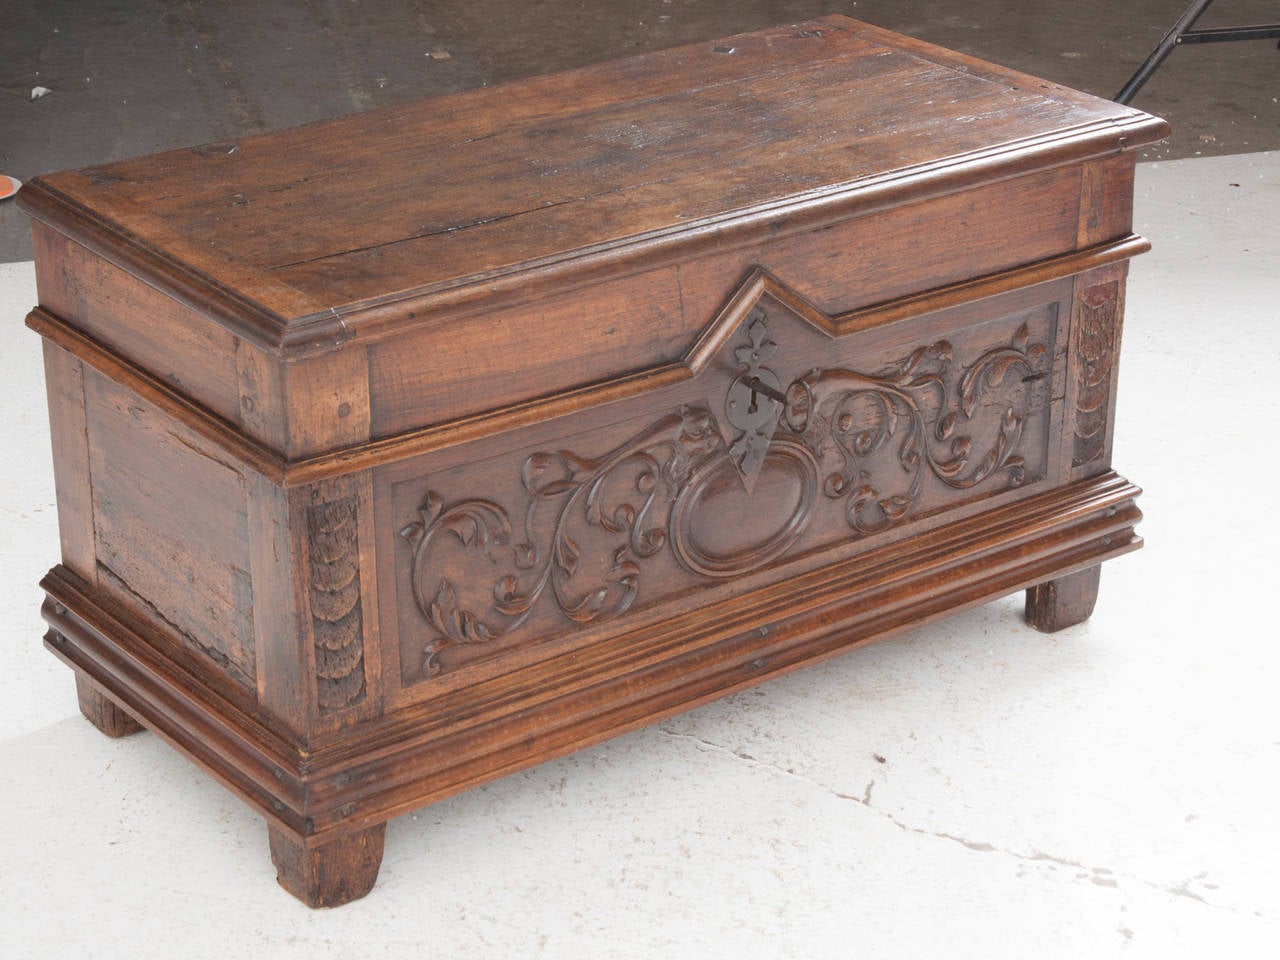 A darling, detailed and stunning carved wood coffer. You can see the detailed craftsmanship in all the carvings and handmade hinges! Hand pegged and made of solid wood, this fine coffer opens to generous storage. Keeping the original lock, we